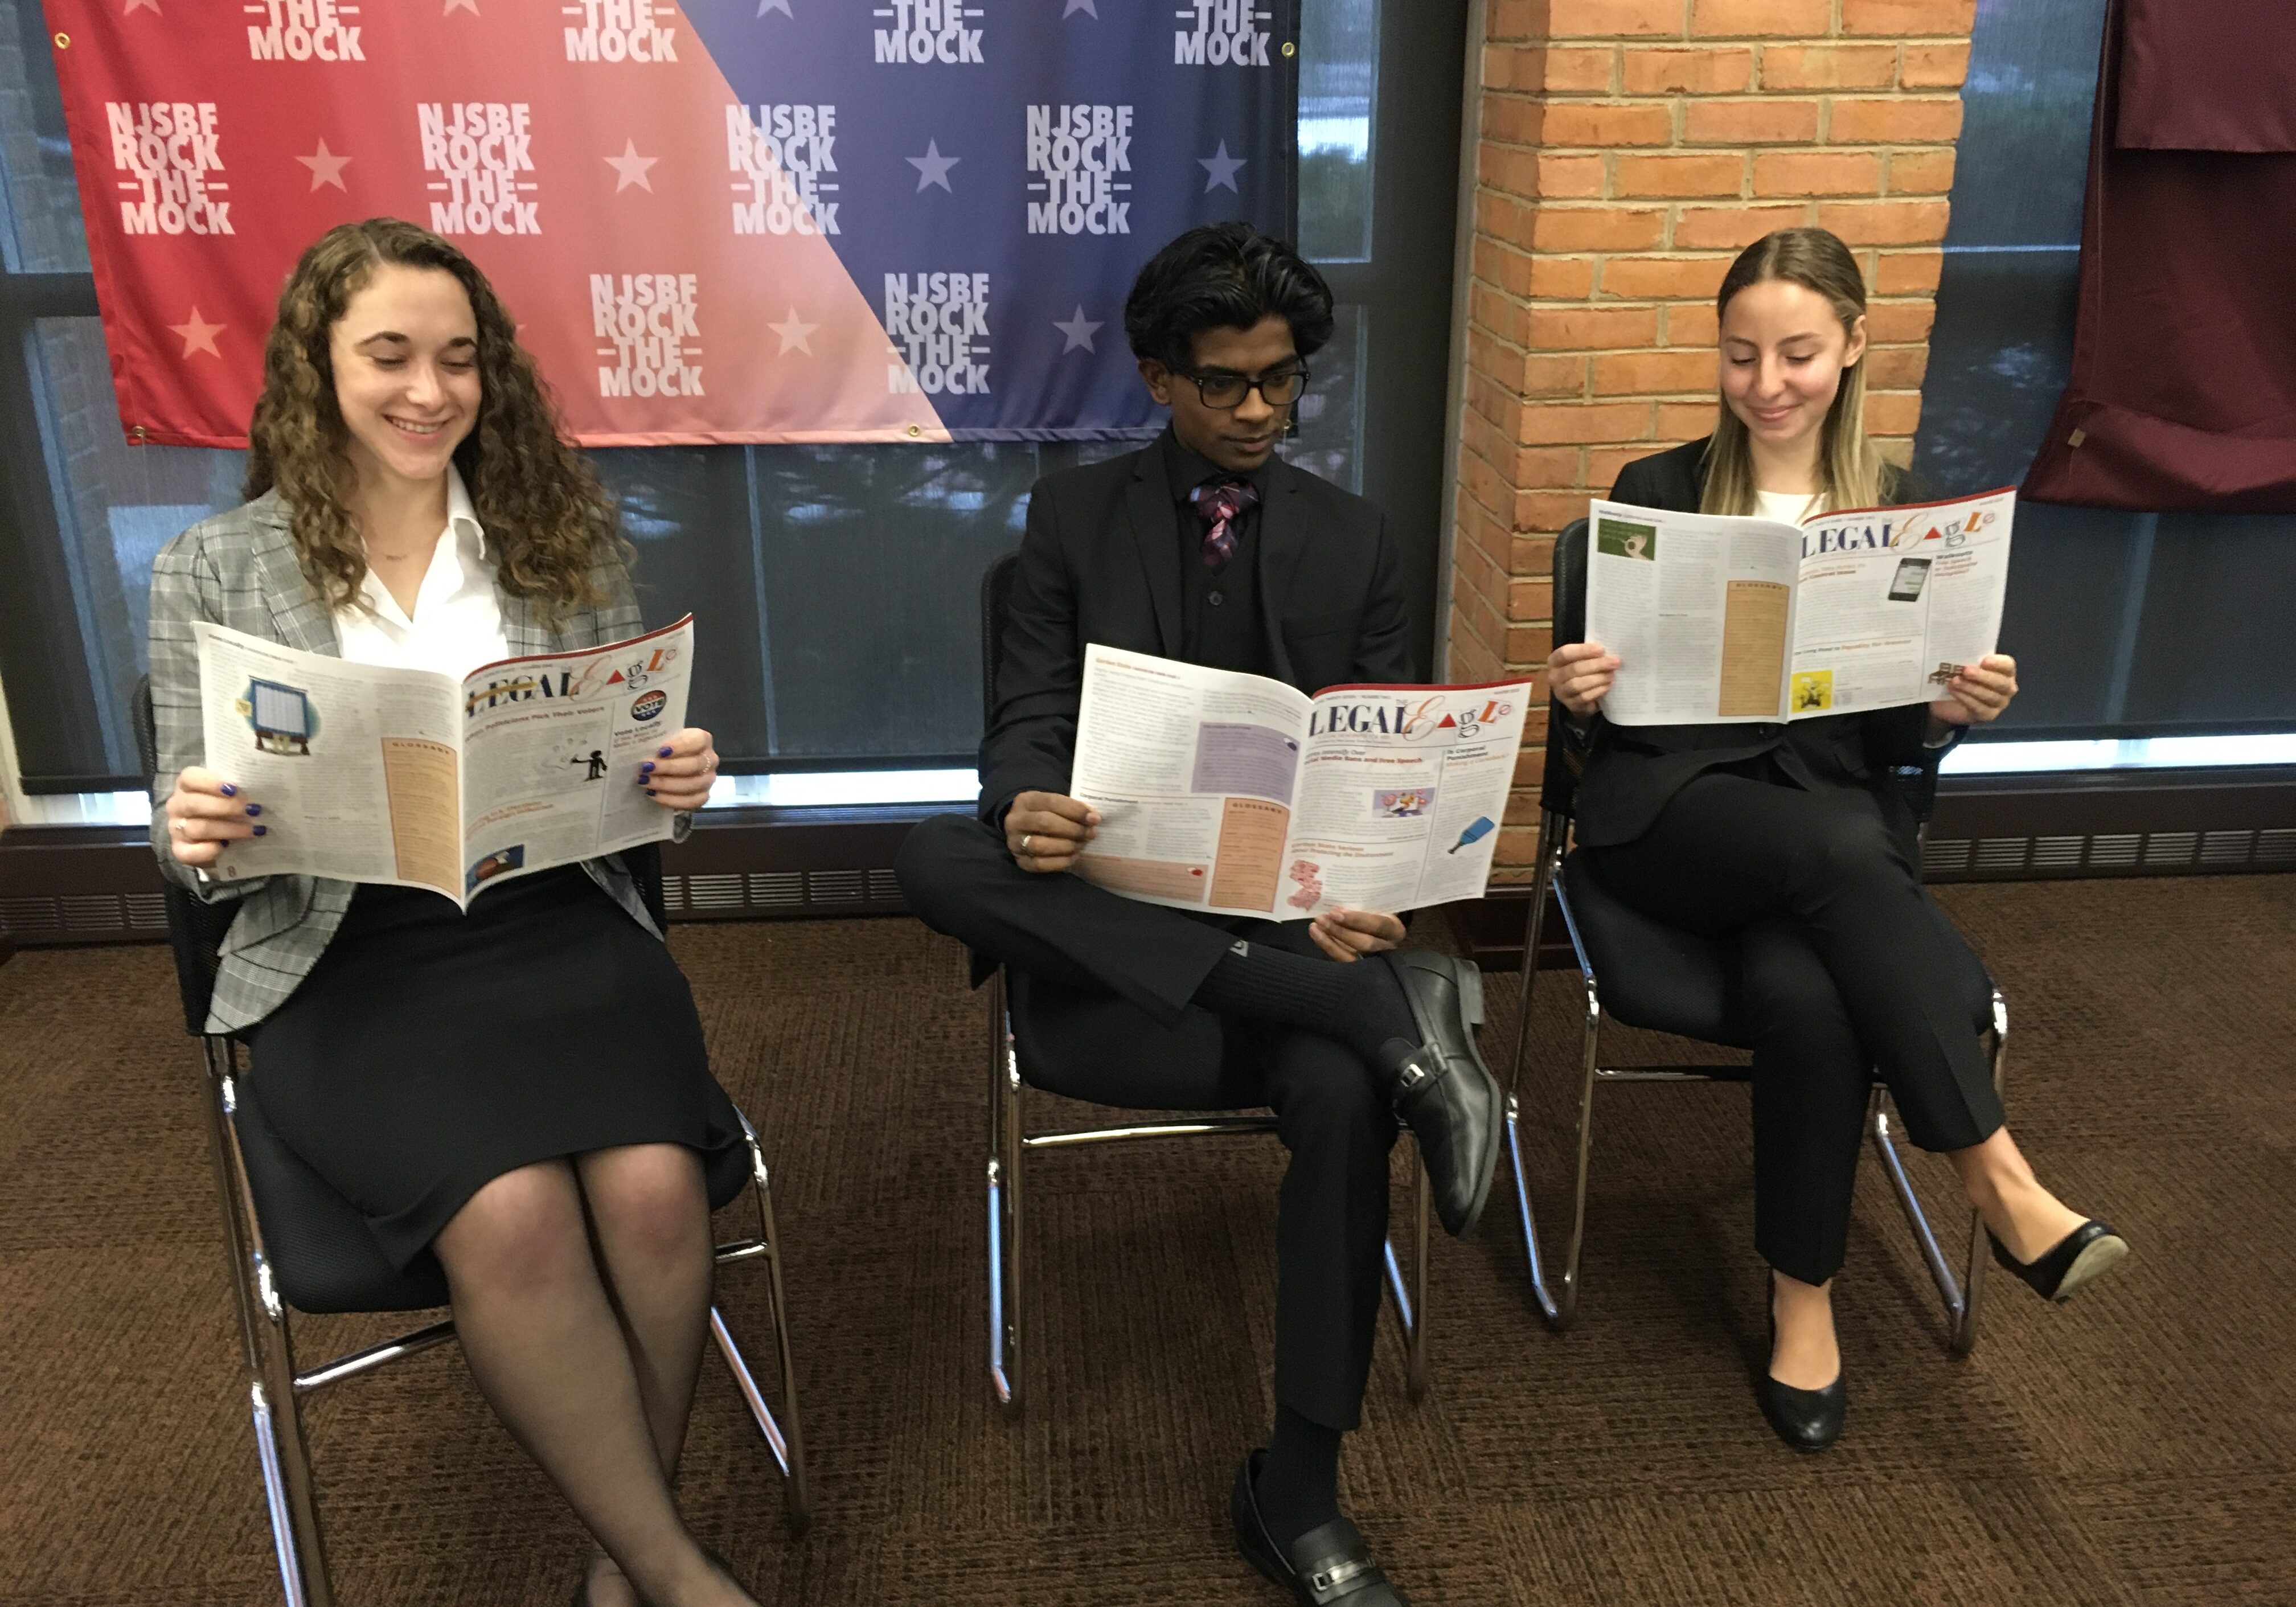 High school students check out the latest issue of Respect.